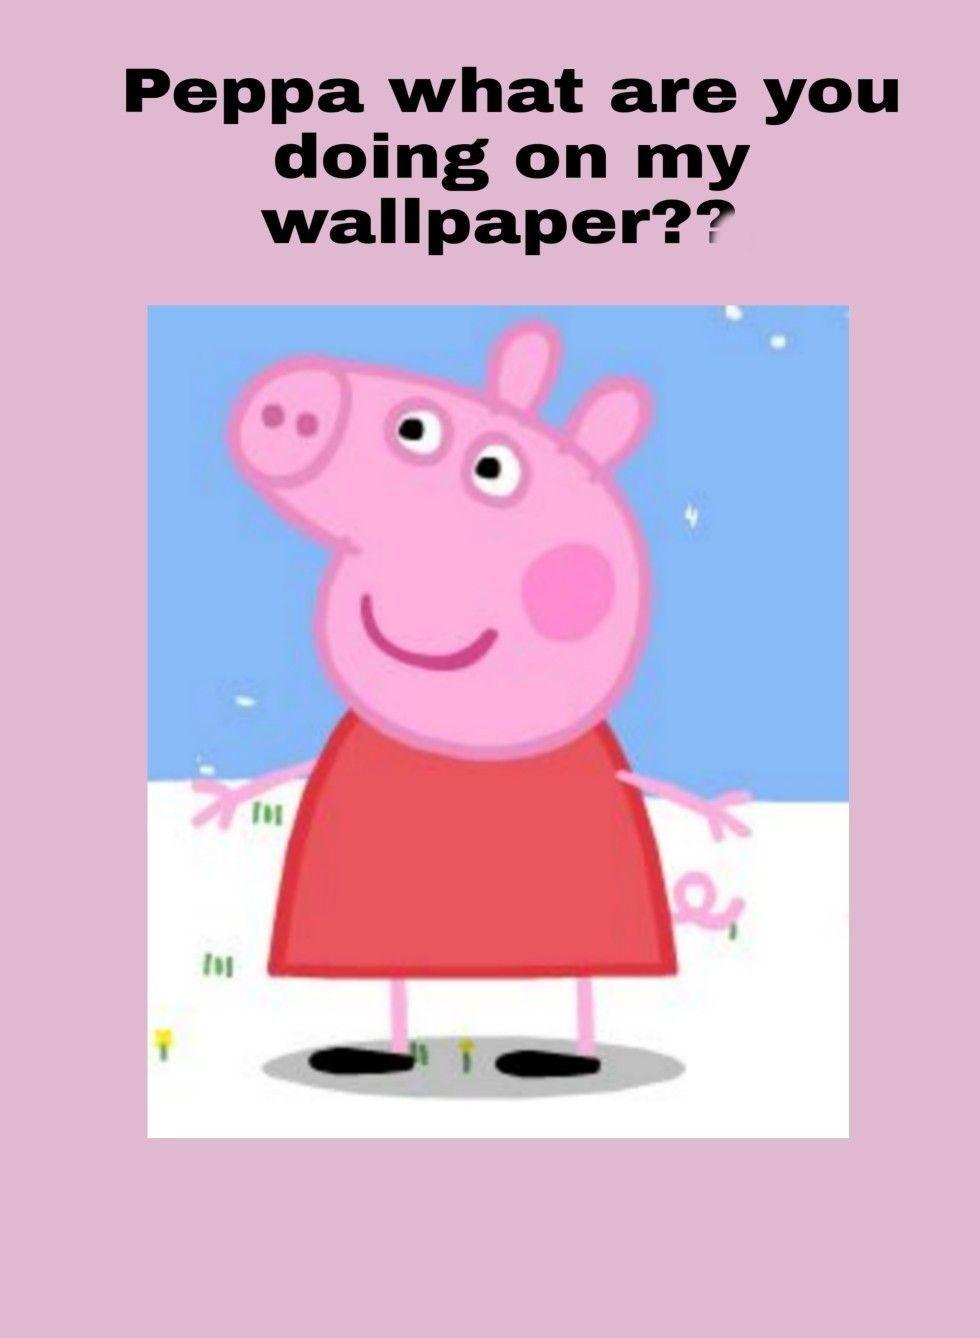 Peppa what are you doing on my wallpaper?. Peppa pig wallpaper, Pig wallpaper, Cute fall wallpaper